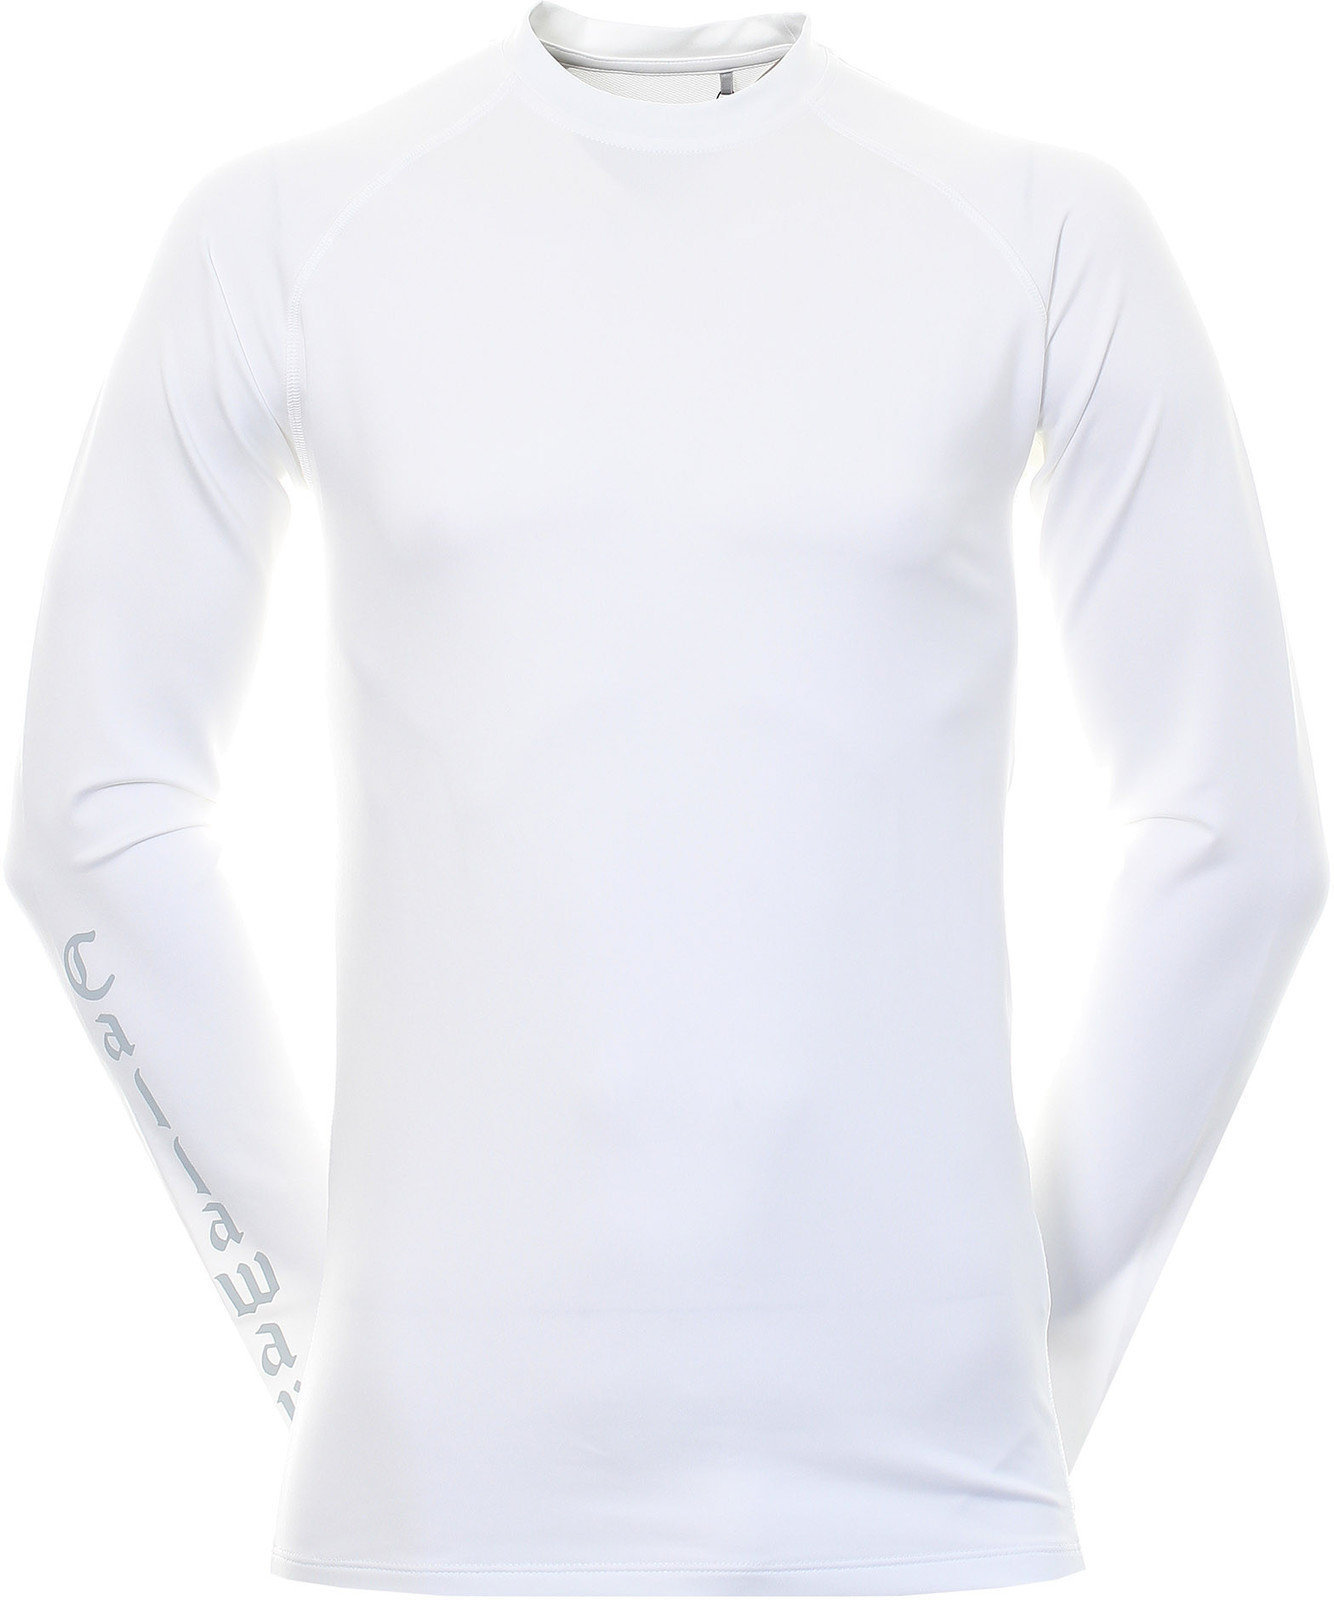 Vêtements thermiques Callaway Long Sleeve Thermal Bright White L